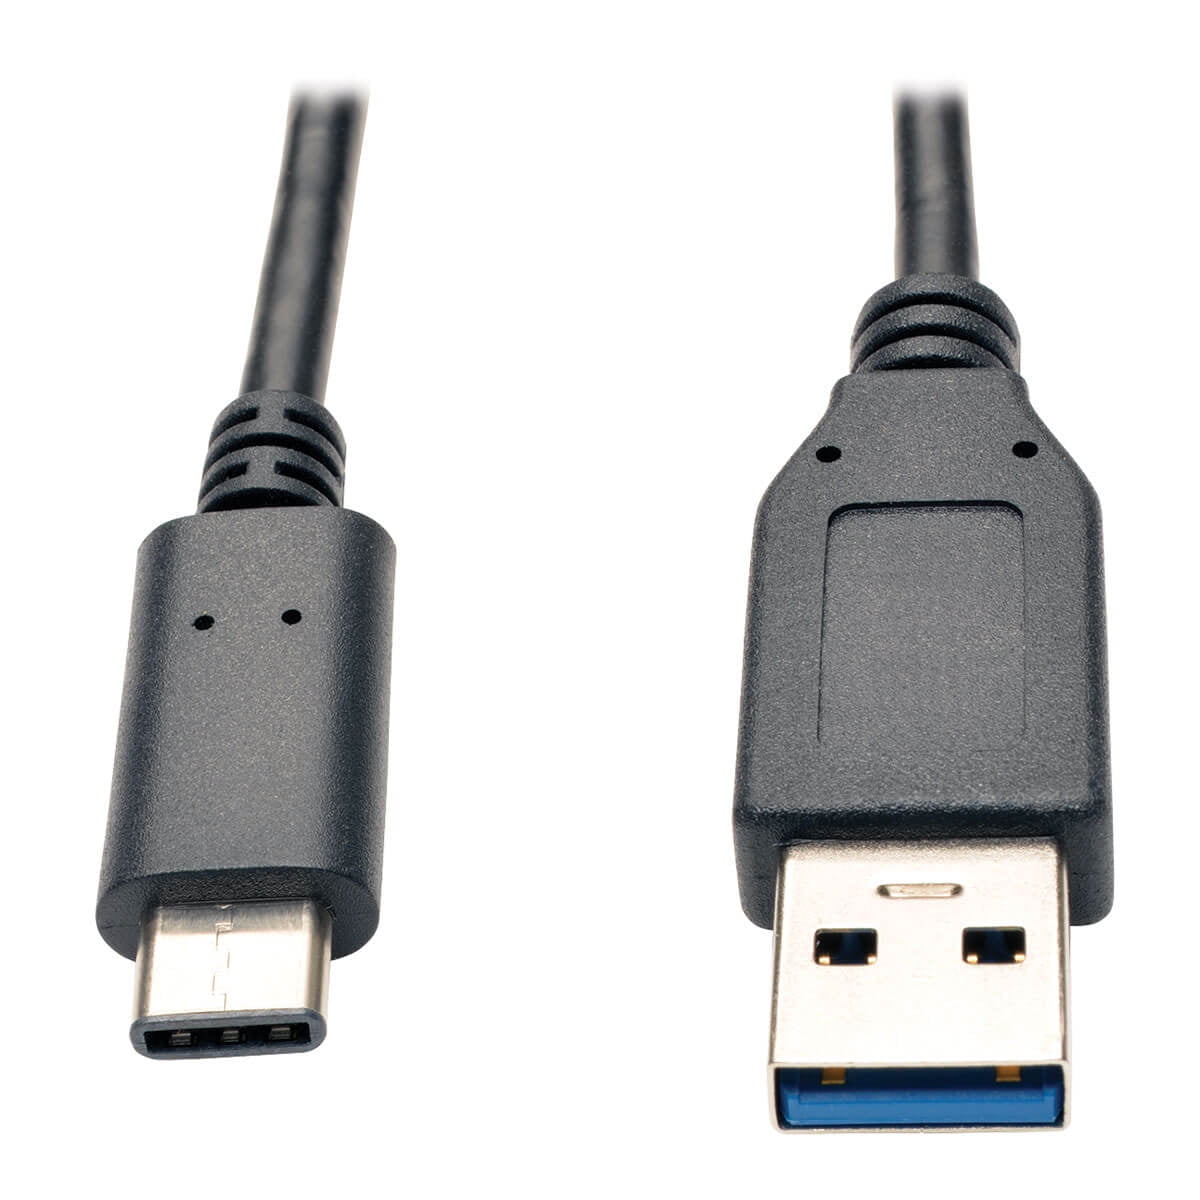 Cables 1m 3ft USB 3.1 Type C USB-C Male Connector to Micro USB 10pin Male Data Cable for Mobile Phone MacBook Huawei p10 Occus Cable Length: 1m, Color: Black 